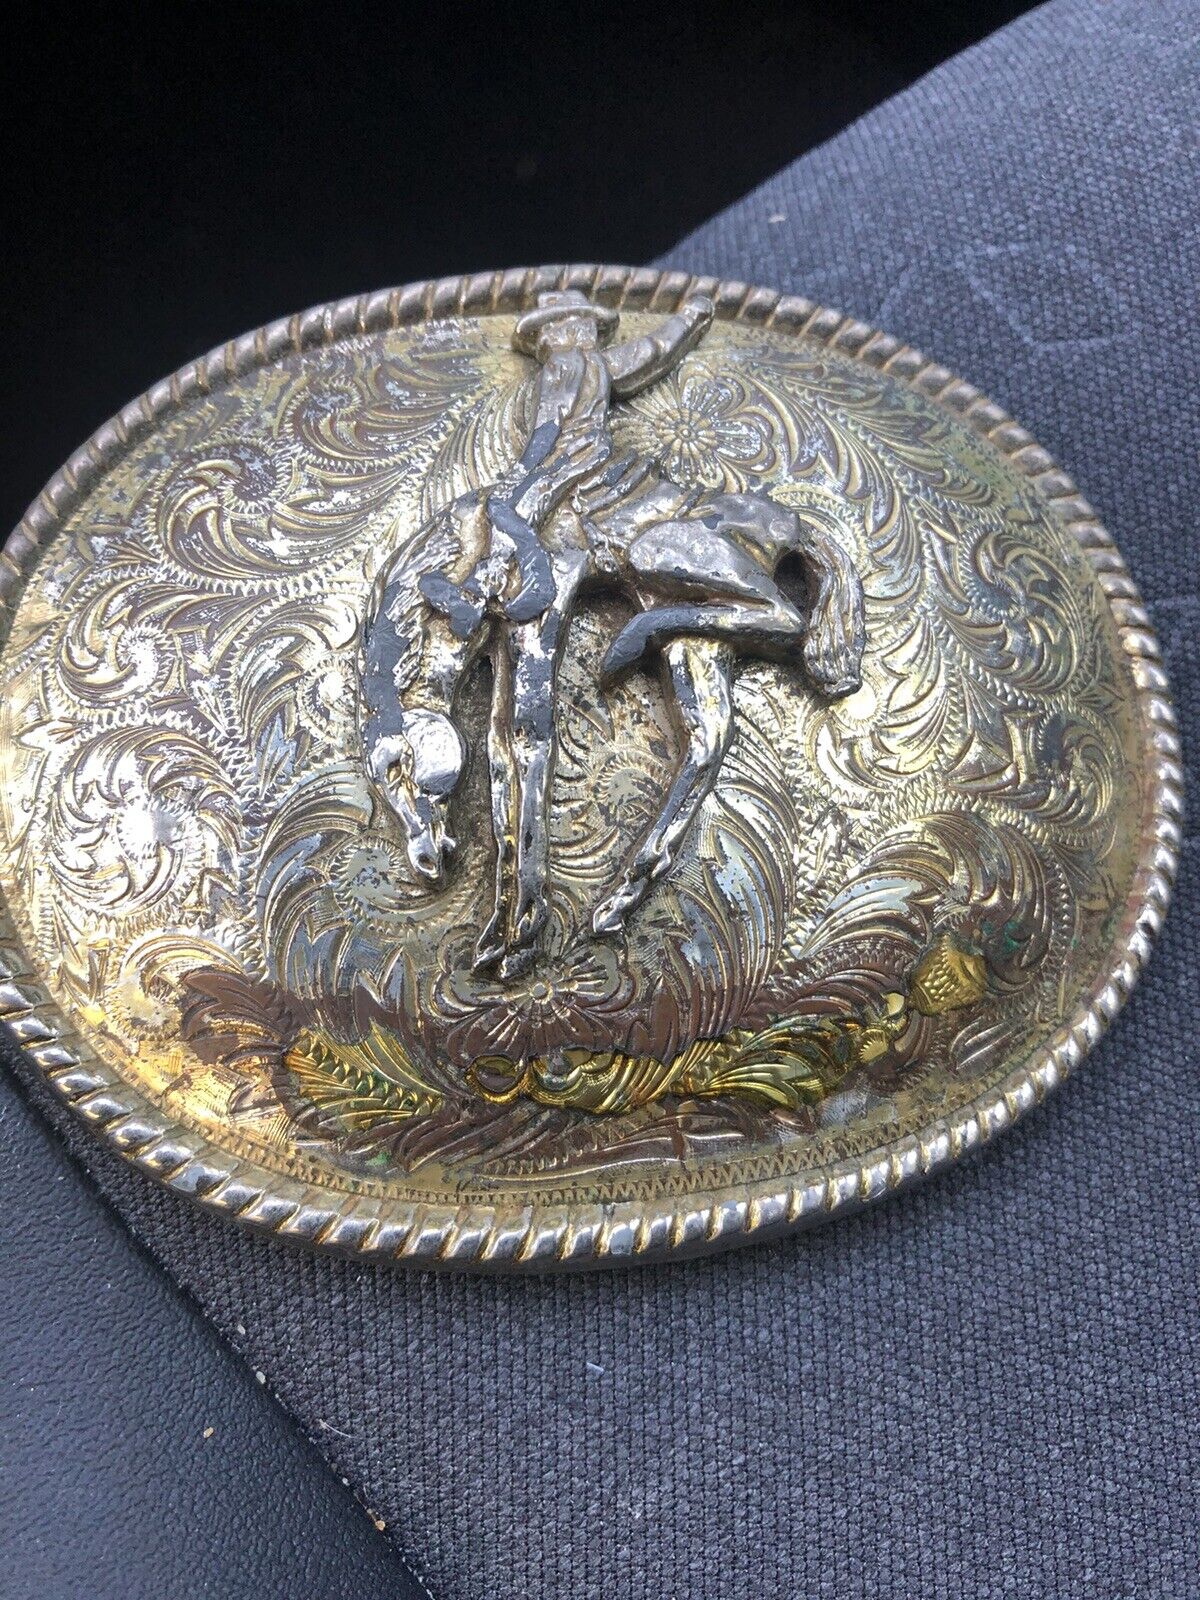 Rodeo Belt buckle Bucking Bronco Made In USA W   Vintage Rodeo Belt Buckle